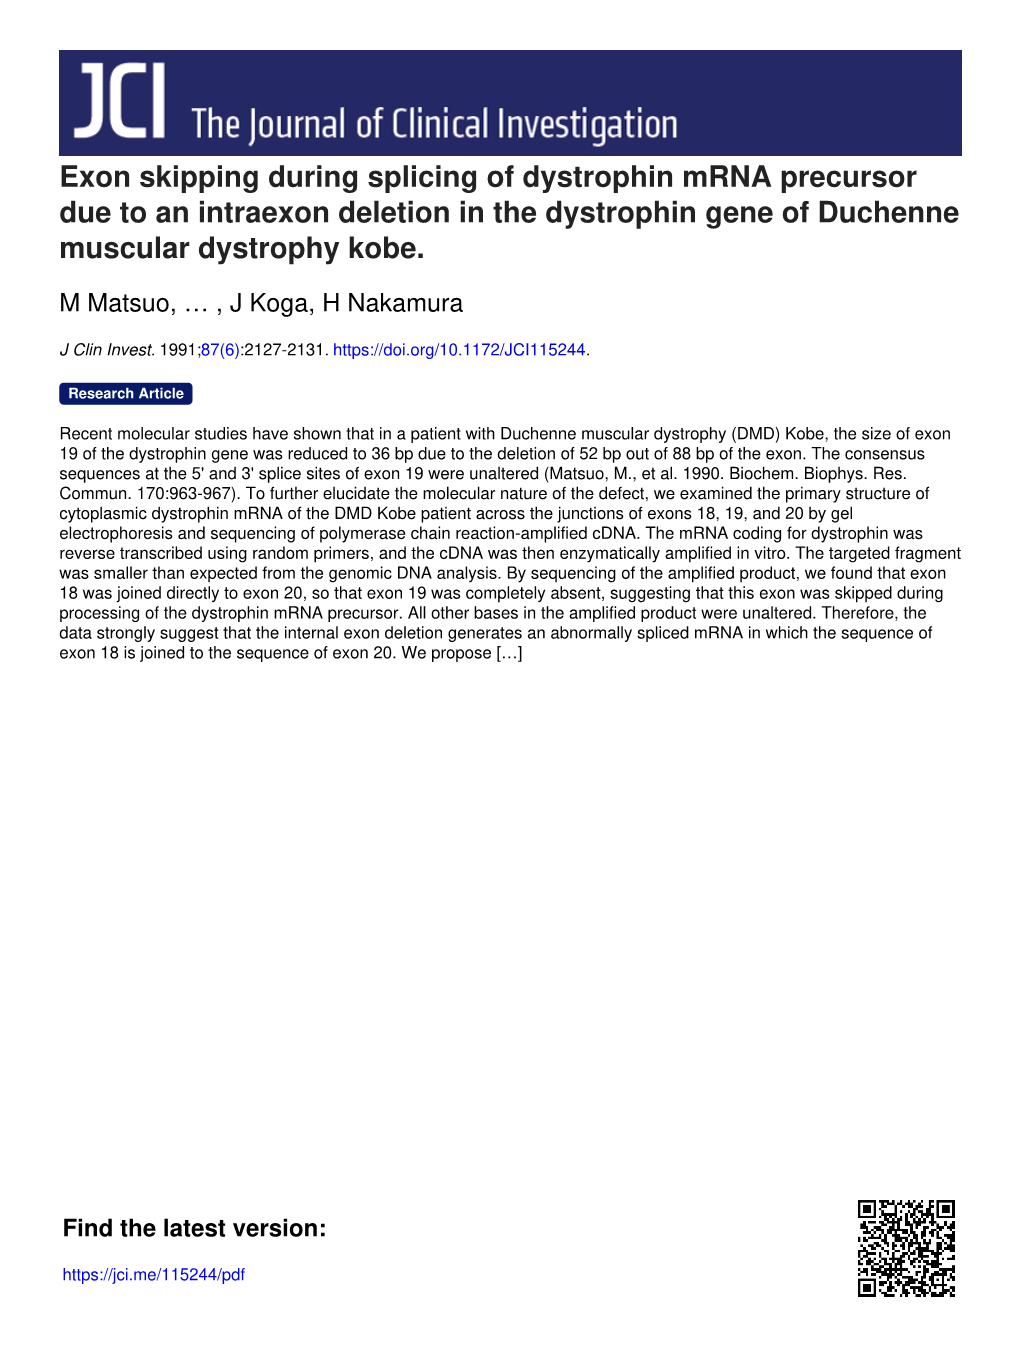 Exon Skipping During Splicing of Dystrophin Mrna Precursor Due to an Intraexon Deletion in the Dystrophin Gene of Duchenne Muscular Dystrophy Kobe